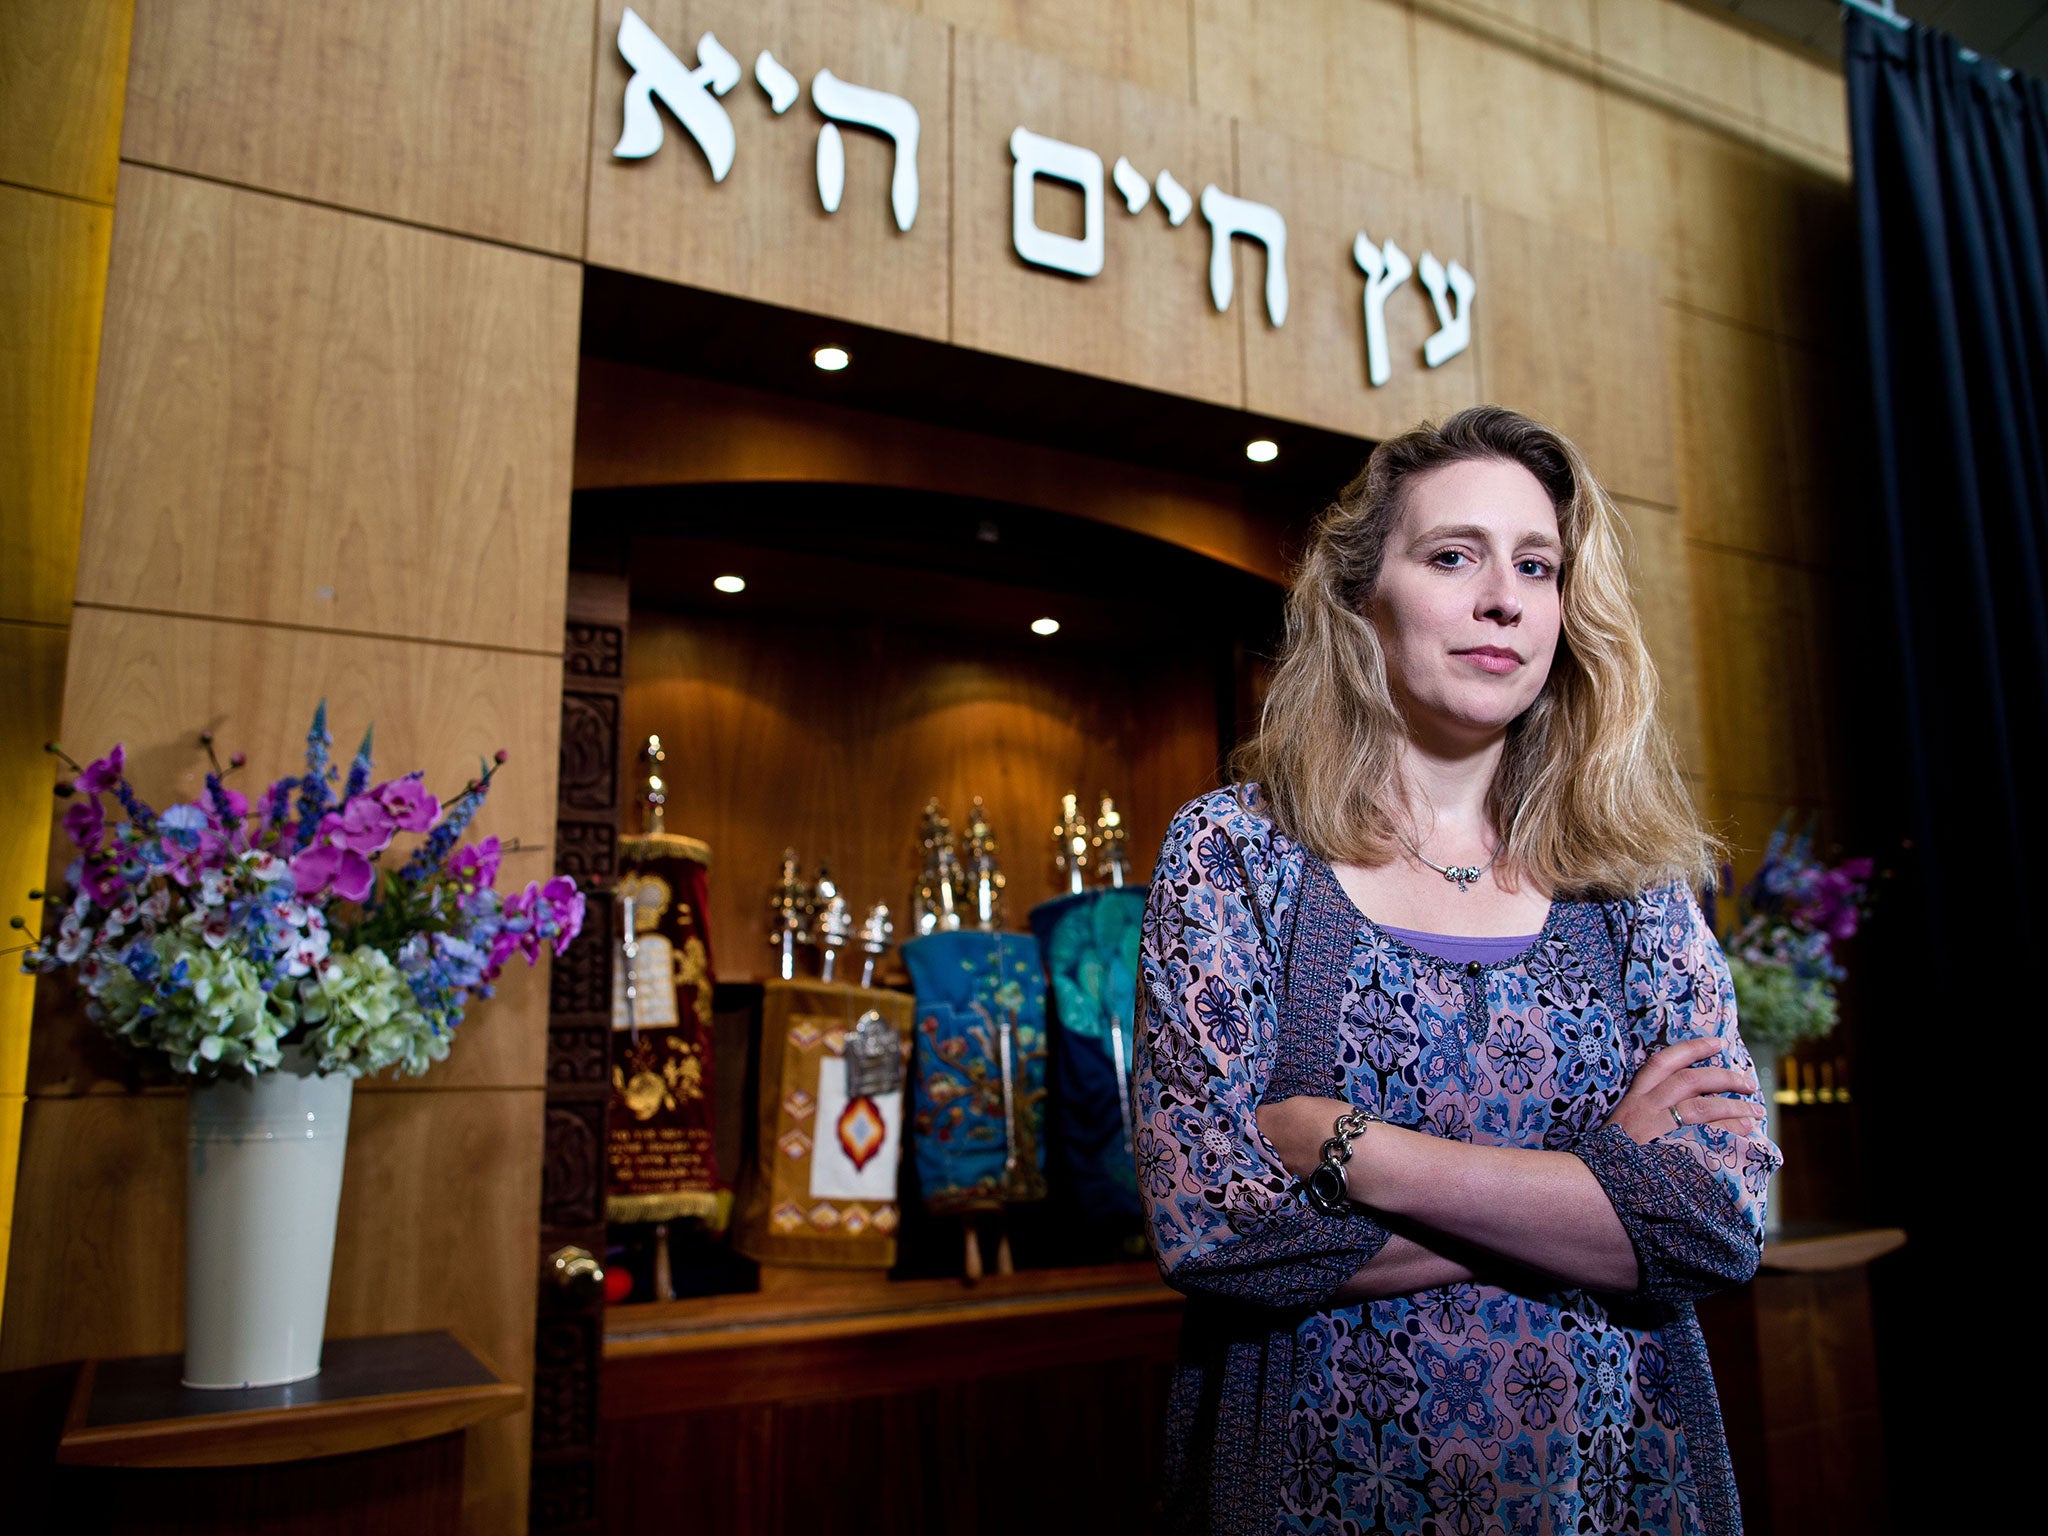 Rabbi Miriam Berger of the Finchley Reform Synagogue, standing in front of the Torah Ark